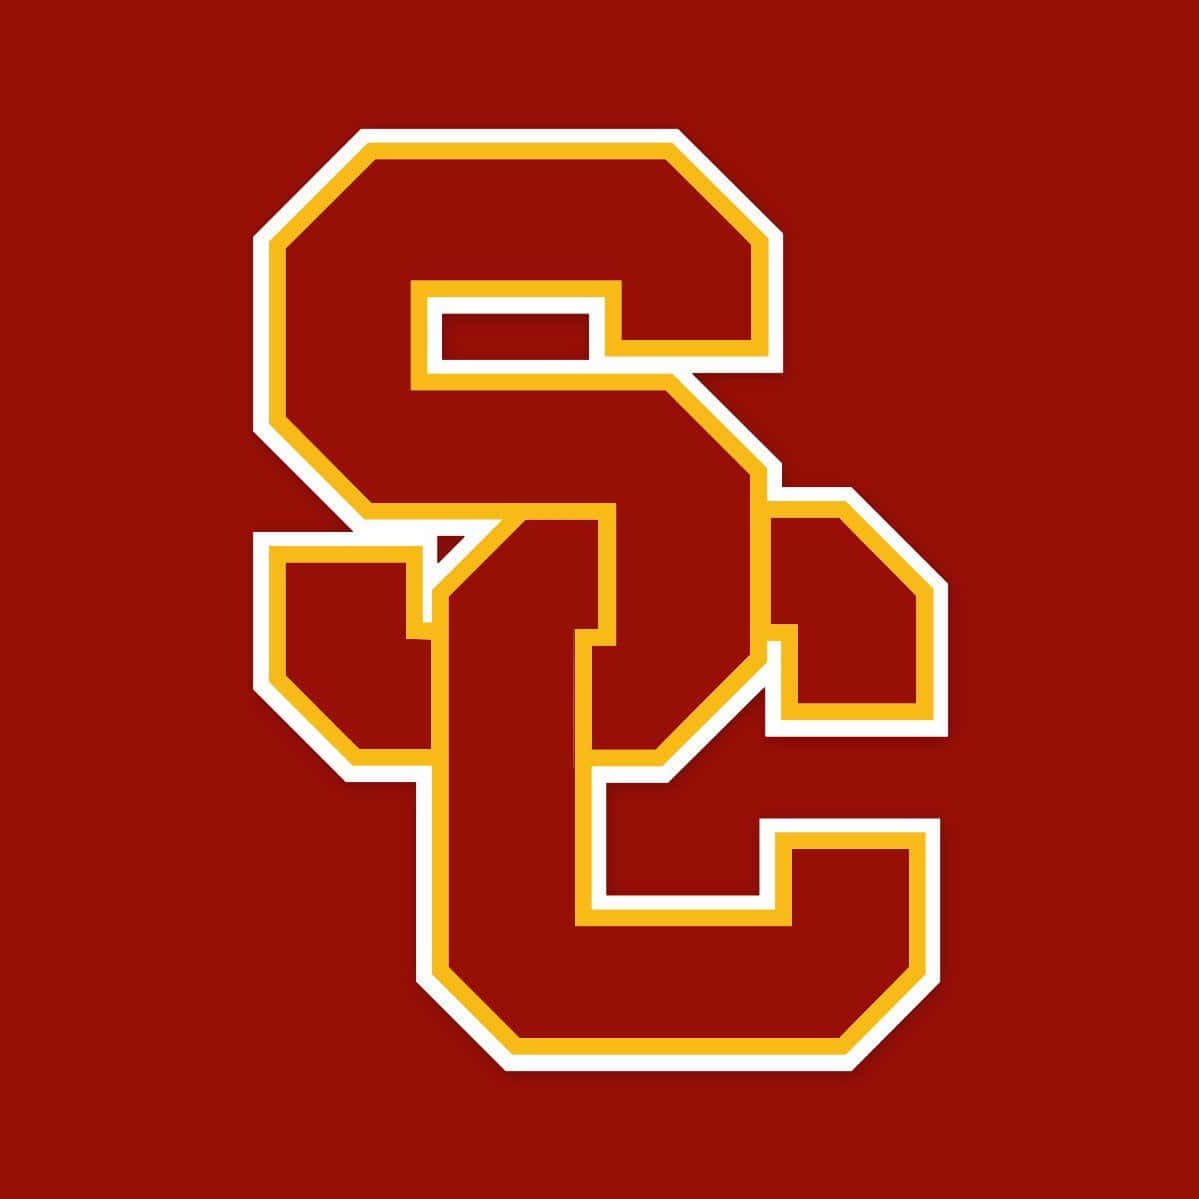 I am very grateful to @Coach_Henson for an offer to play for the University of Southern California Trojans! @uscfb @ProsperEaglesFB @CoachSteamroll @CoachHutti @Coach_Moore5 @Coach_Hill2 @dctf @dlemons59 @Marchen44